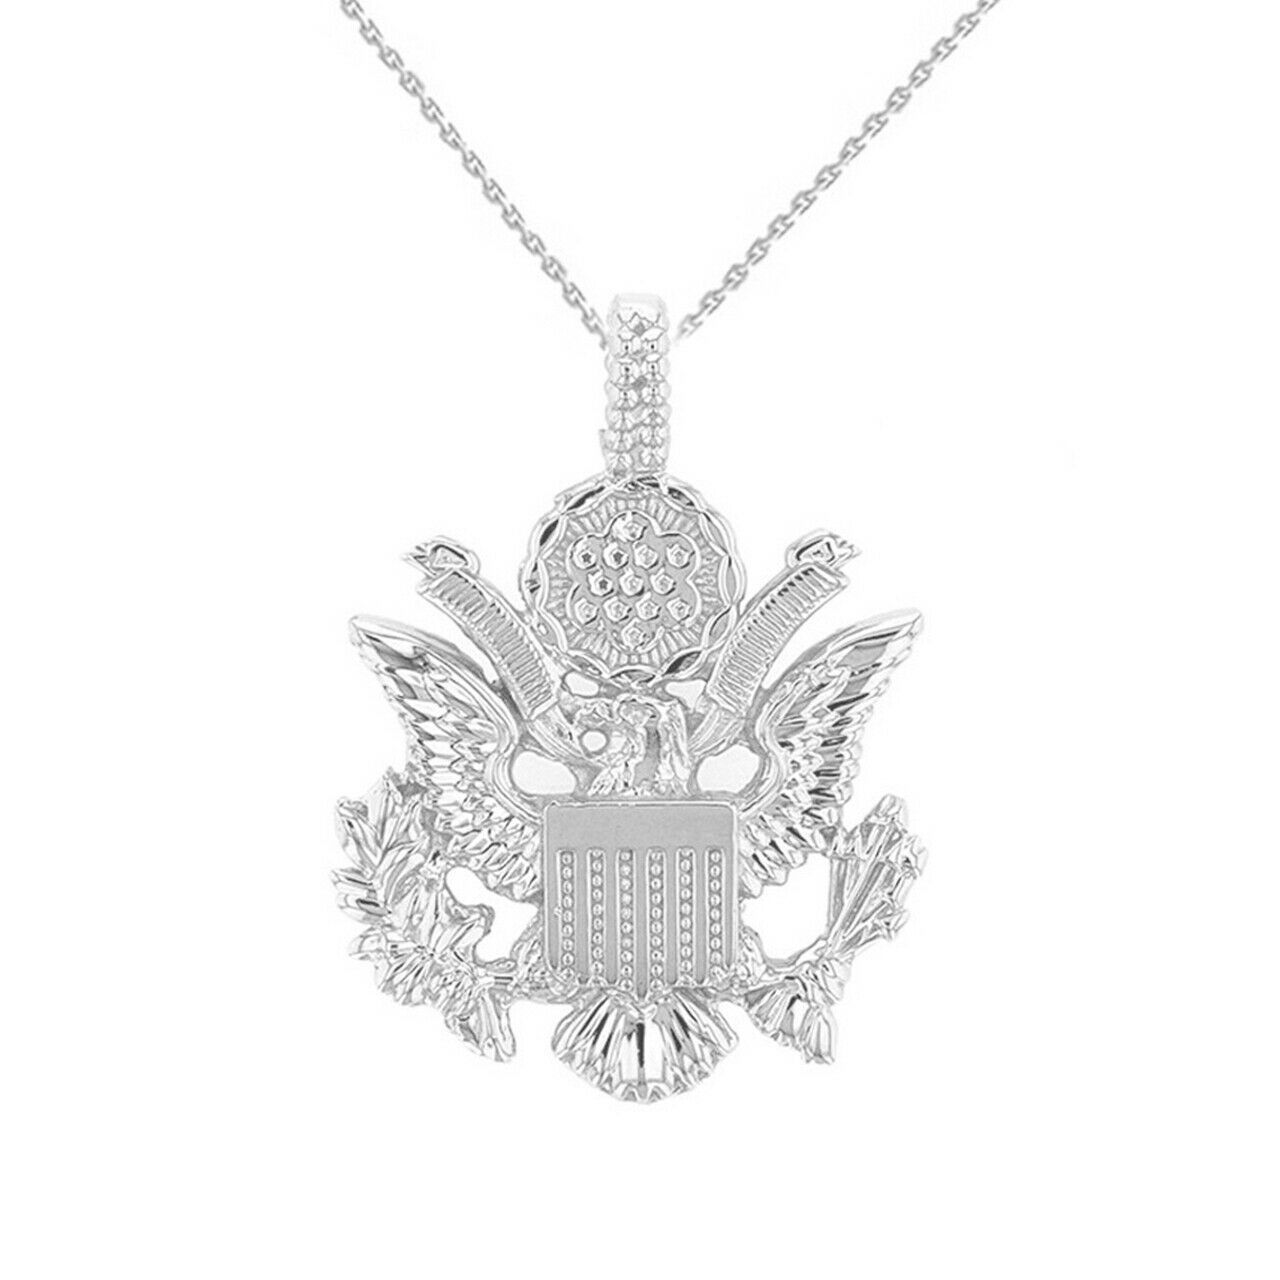 925 Sterling Silver American Eagle Coat of Arms Pendant Necklace  - $54.35 - $82.07